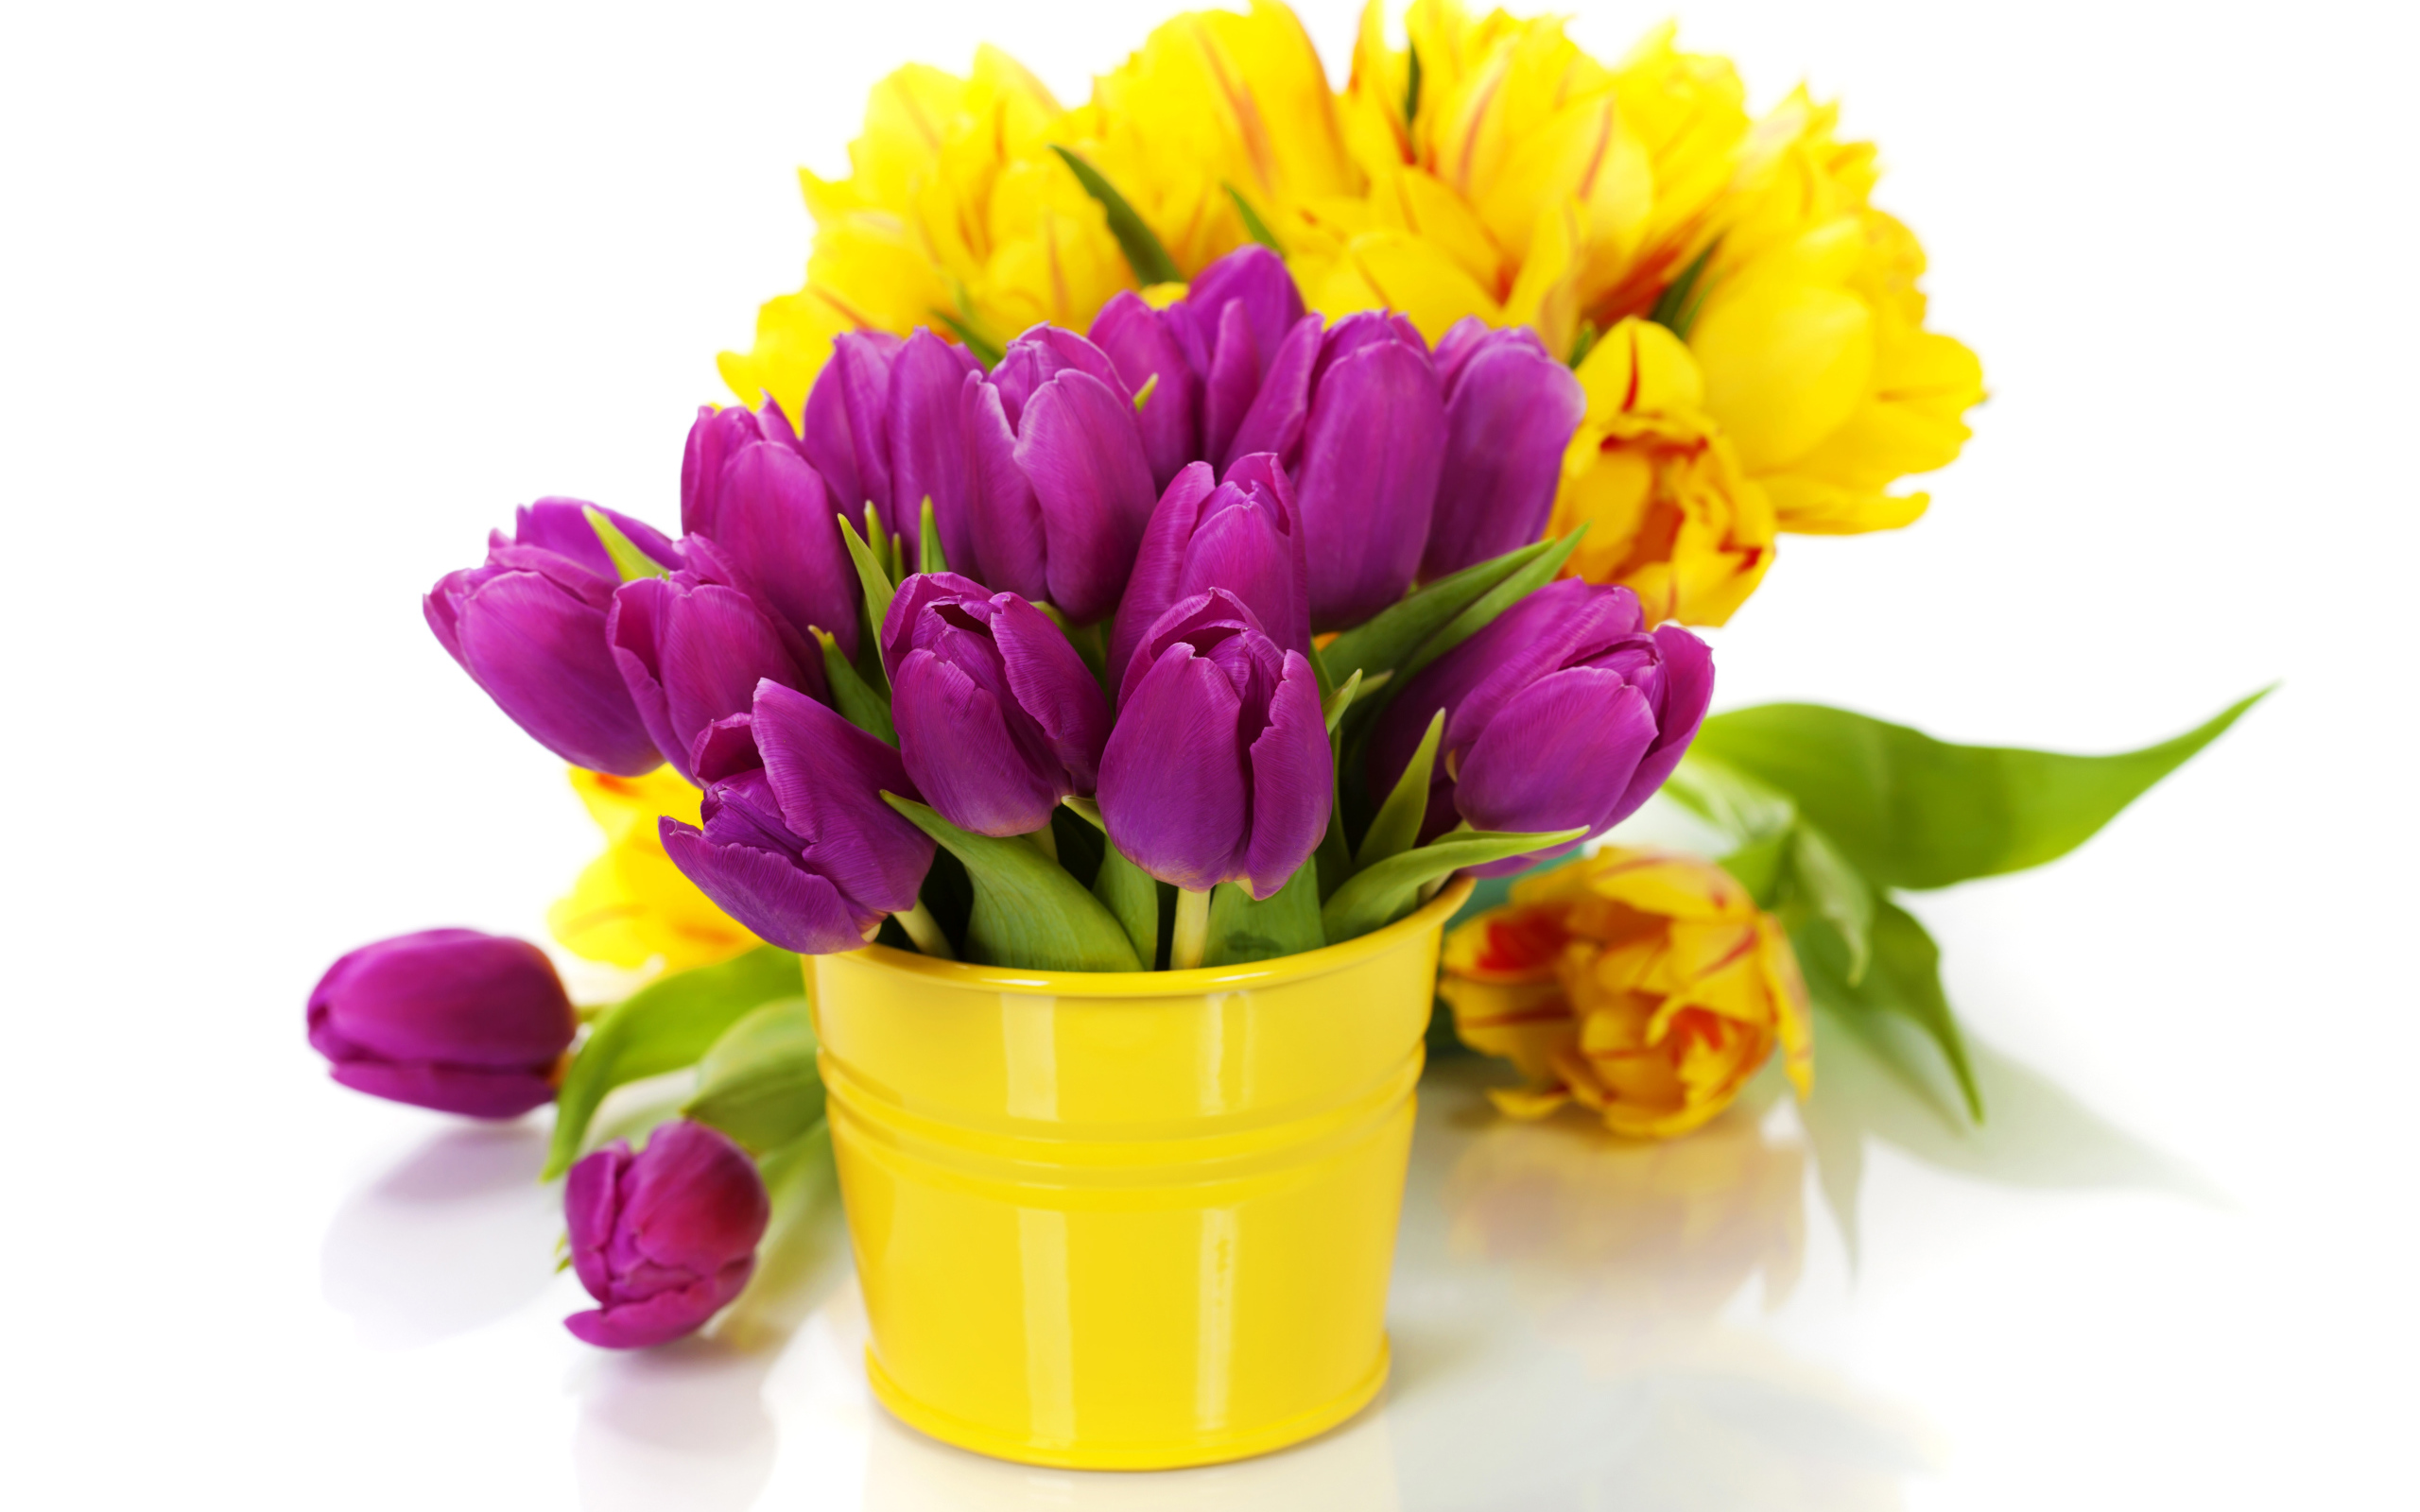 Lilac and yellow tulips in vases on a white background